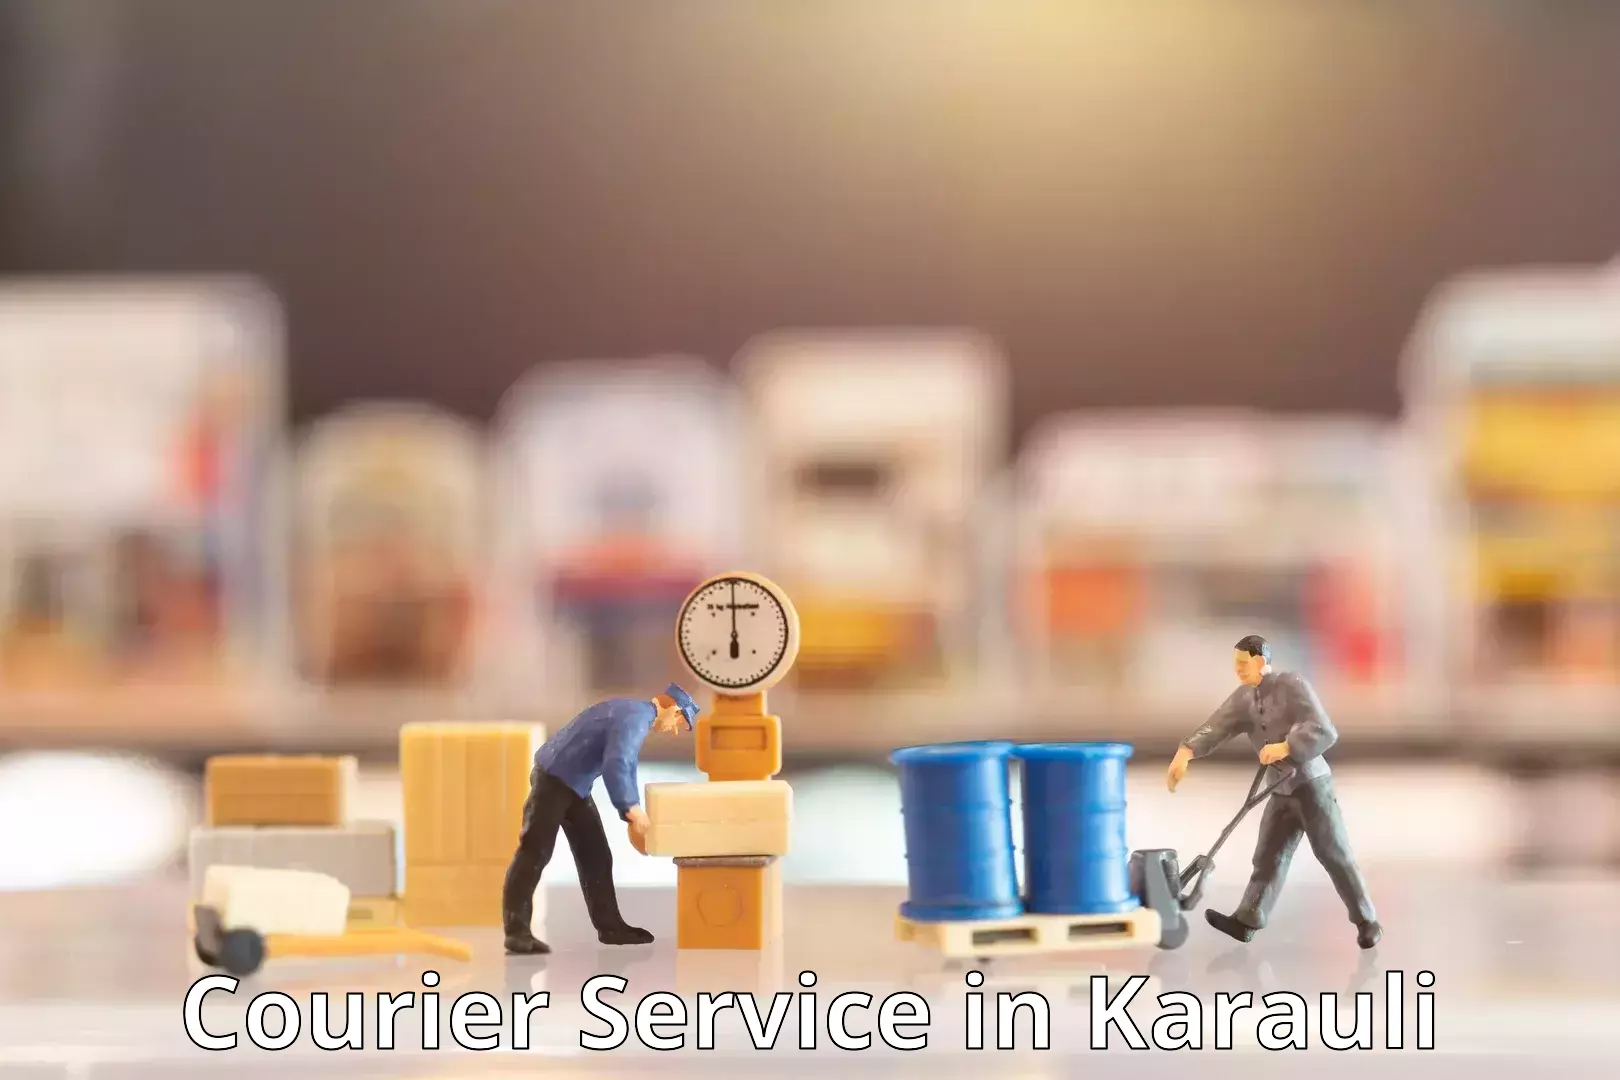 Secure freight services in Karauli